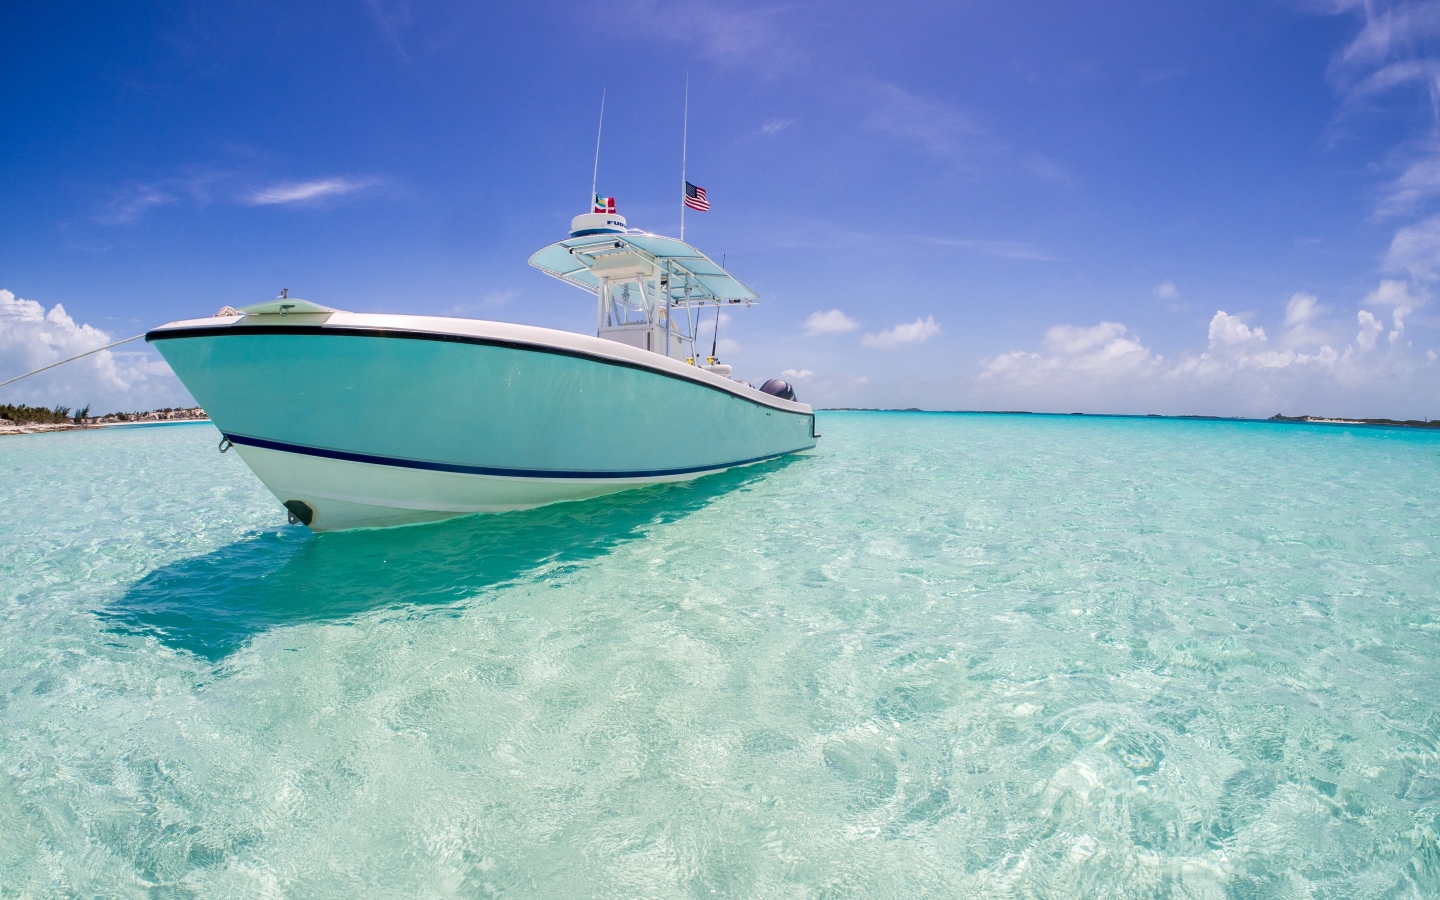 Boat in Paradise for 1440 x 900 widescreen resolution